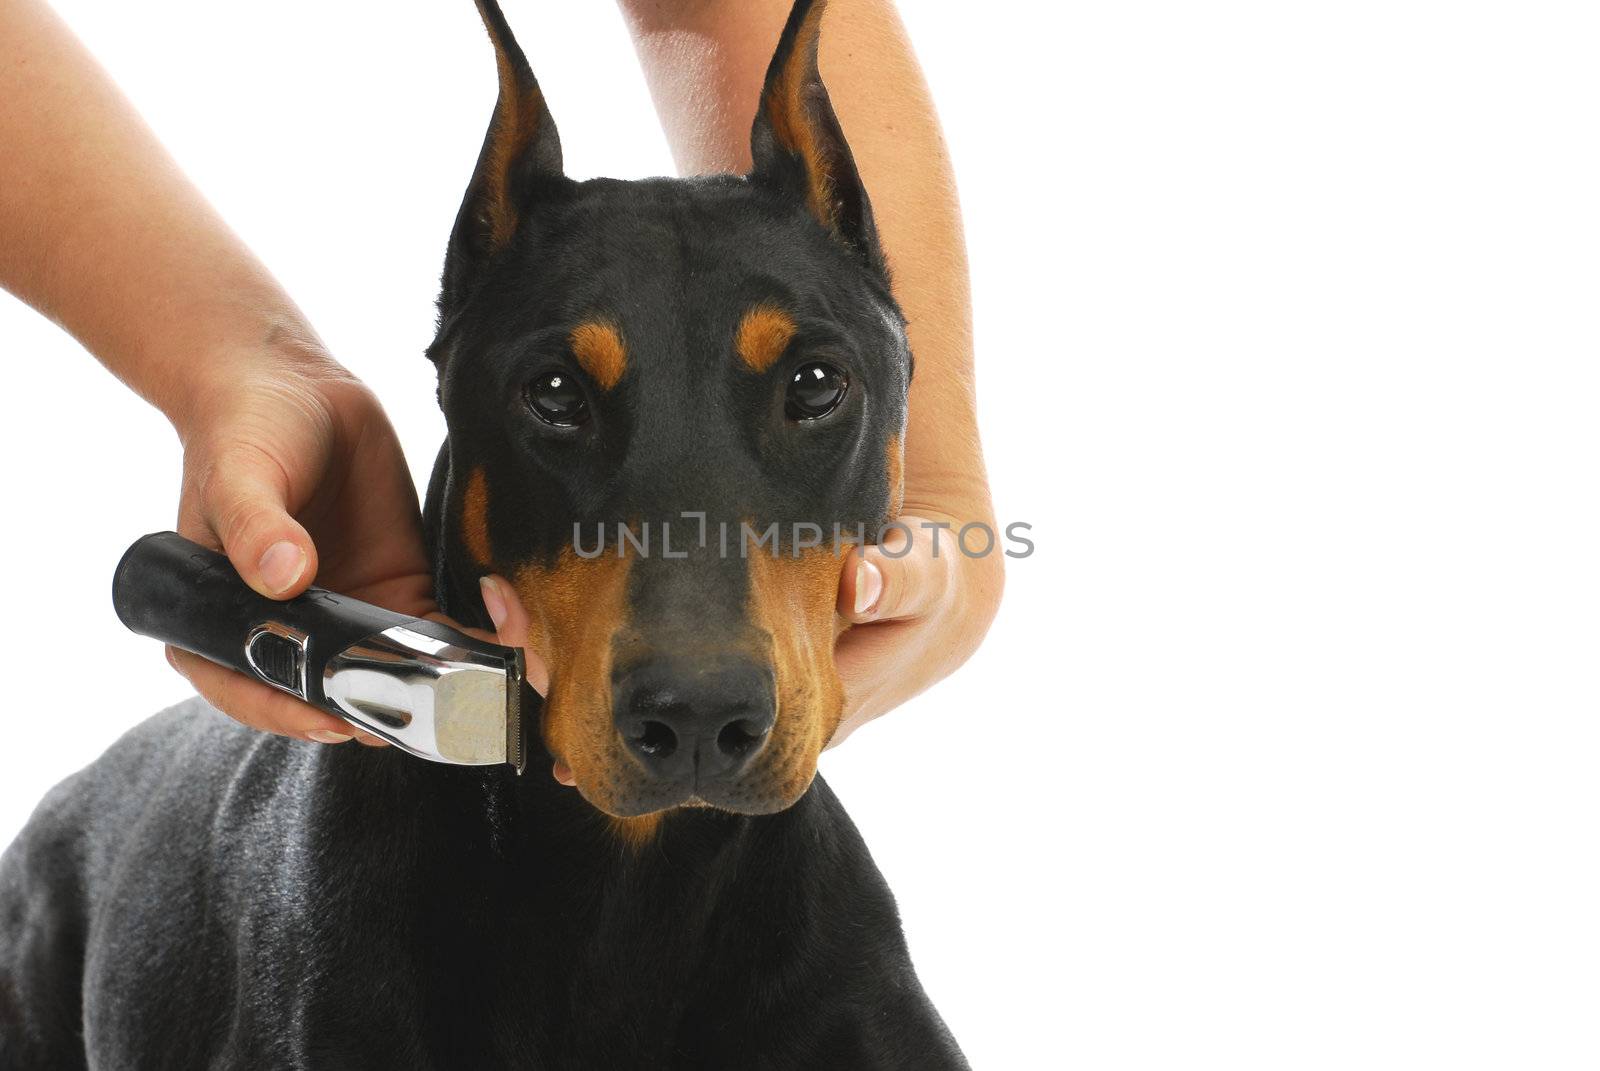 shaving dogs face - doberman pinscher getting whiskers shaved